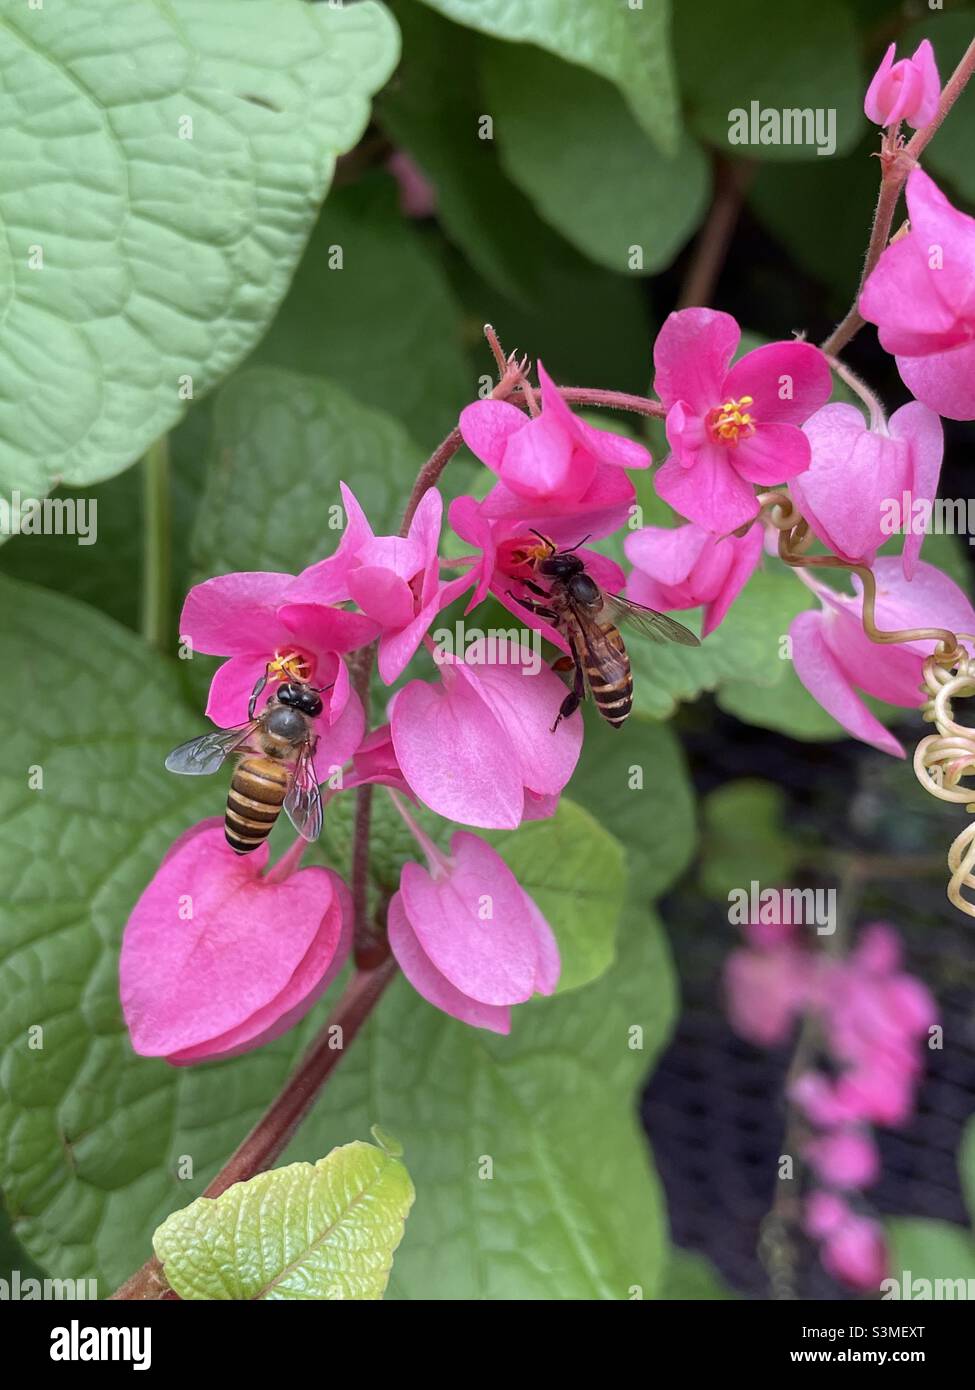 Bees on pink flowers Stock Photo